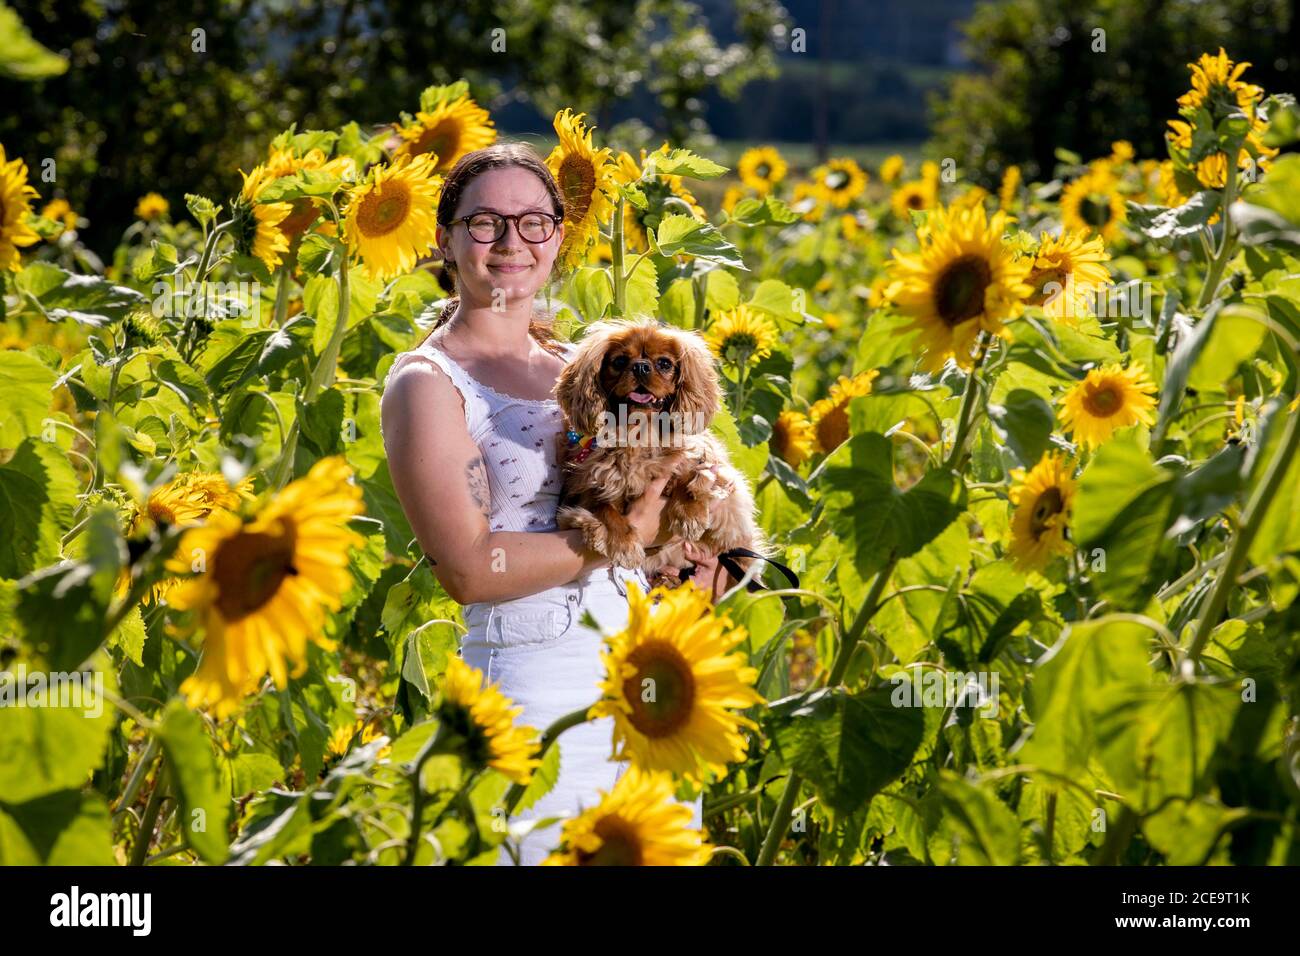 Patrice Green,25, from Belfast on a day trip celebrating her King Charles dog Bear on his their third birthday pictured together at the Sunflower Field Portglenone, on Bank Holiday Monday in Northern Ireland. The Sunflower Field is grow annually and the owners asking for a small fee to enter with proceeds this year for Versus Arthritis. Stock Photo